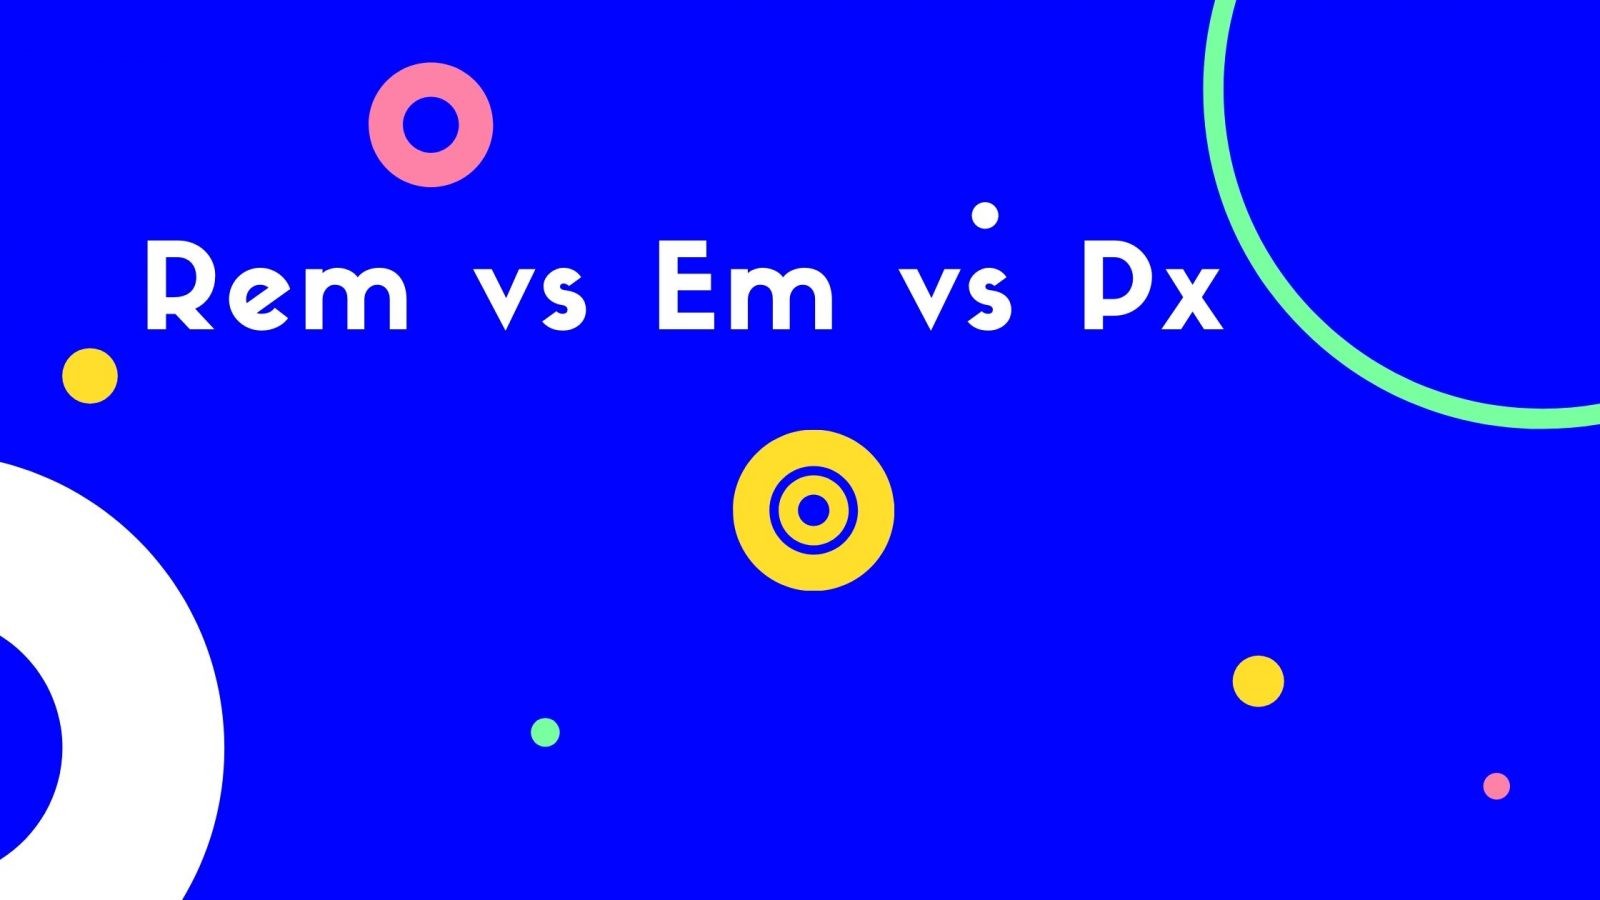 Rem vs Em vs Px: When to use these units